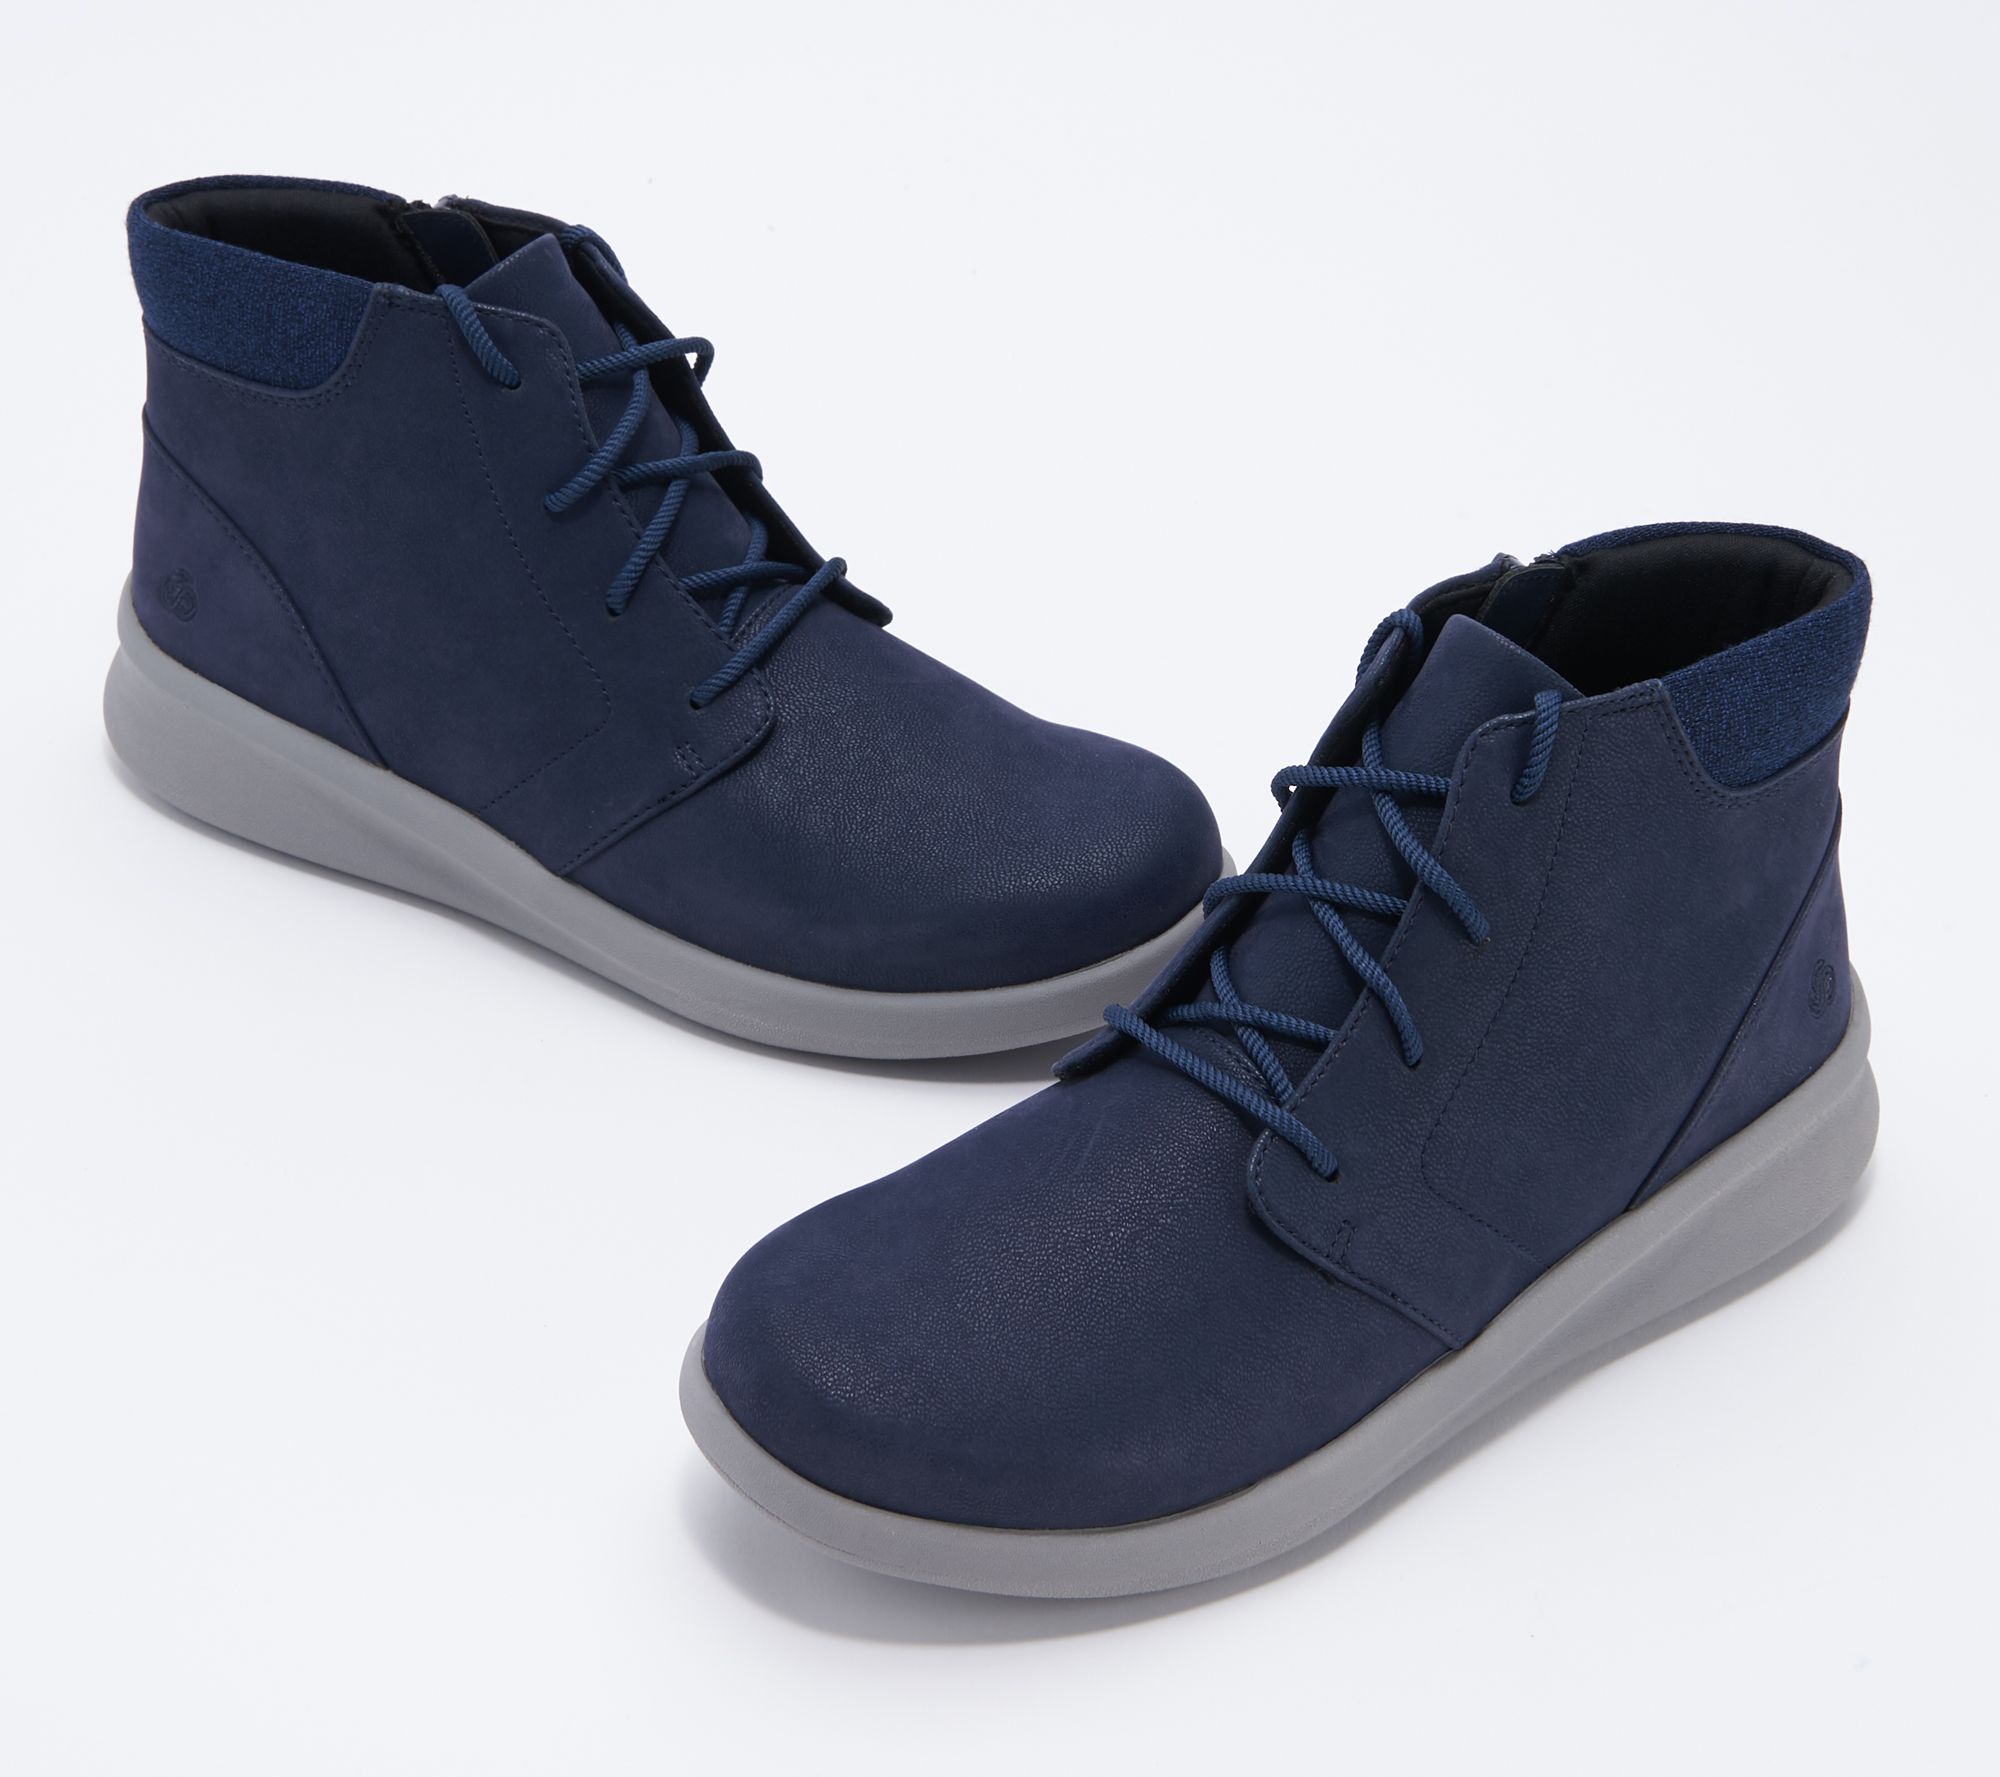 CLOUDSTEPPERS by Clarks Lace-Up Ankle 